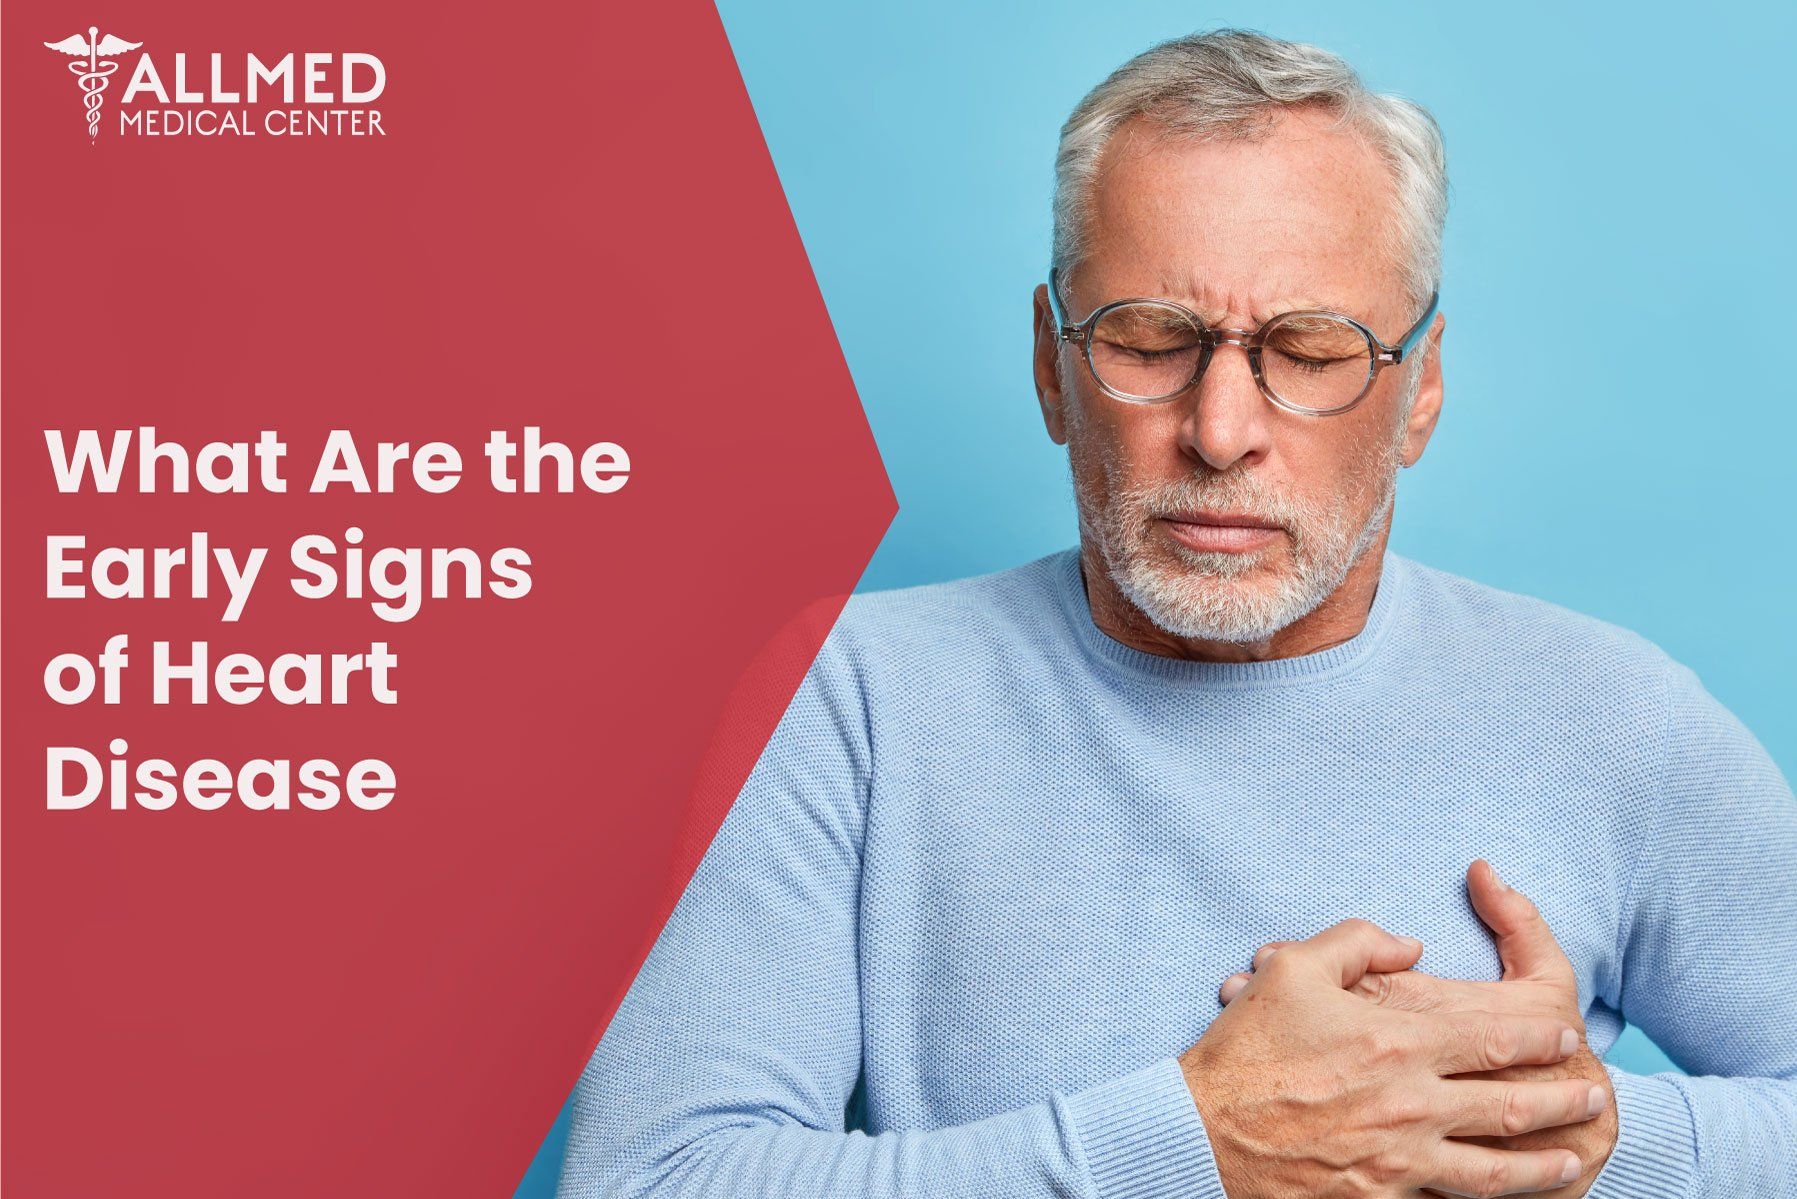 What Are the Early Signs of Heart Disease